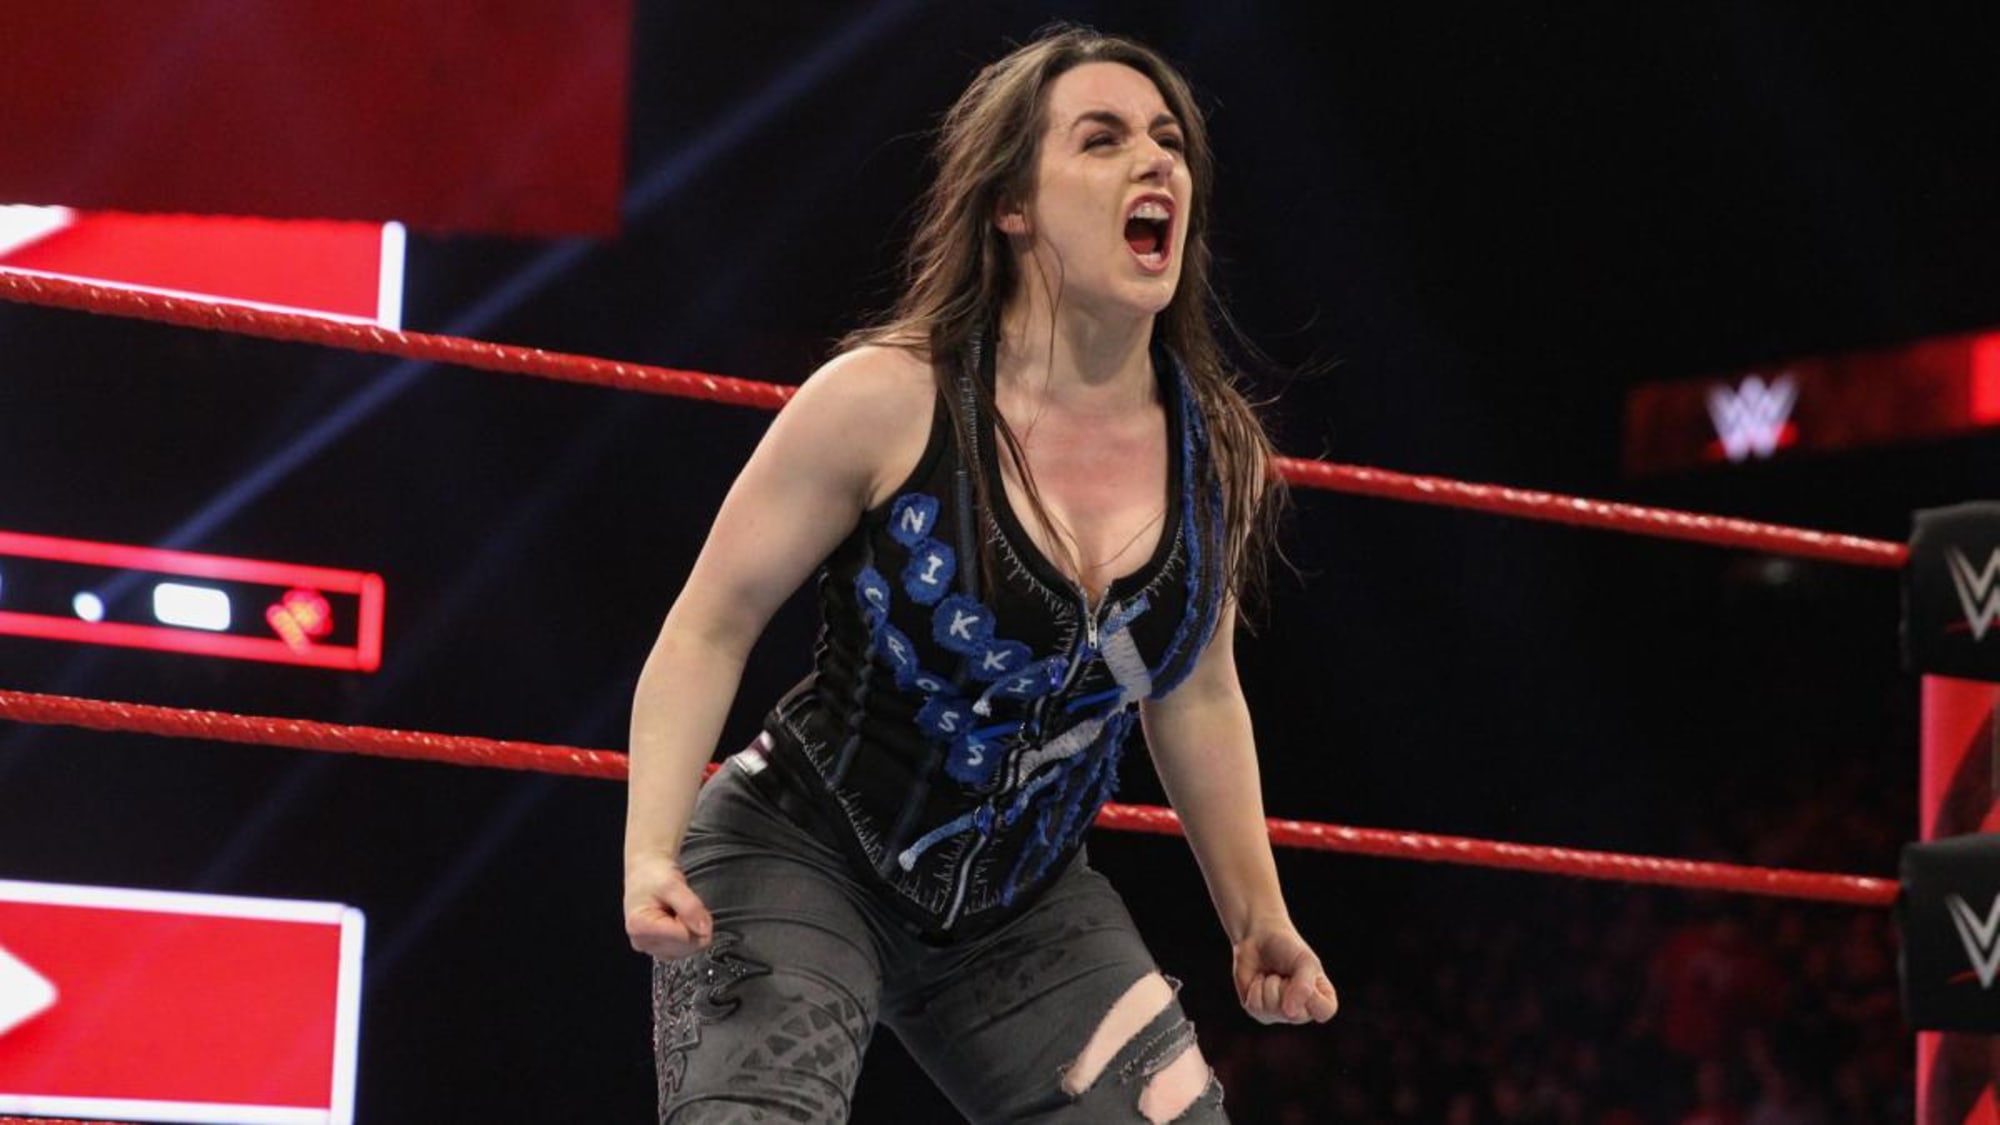 WWE star Nikki Cross was booked heavily as an underdog giving deference to ...